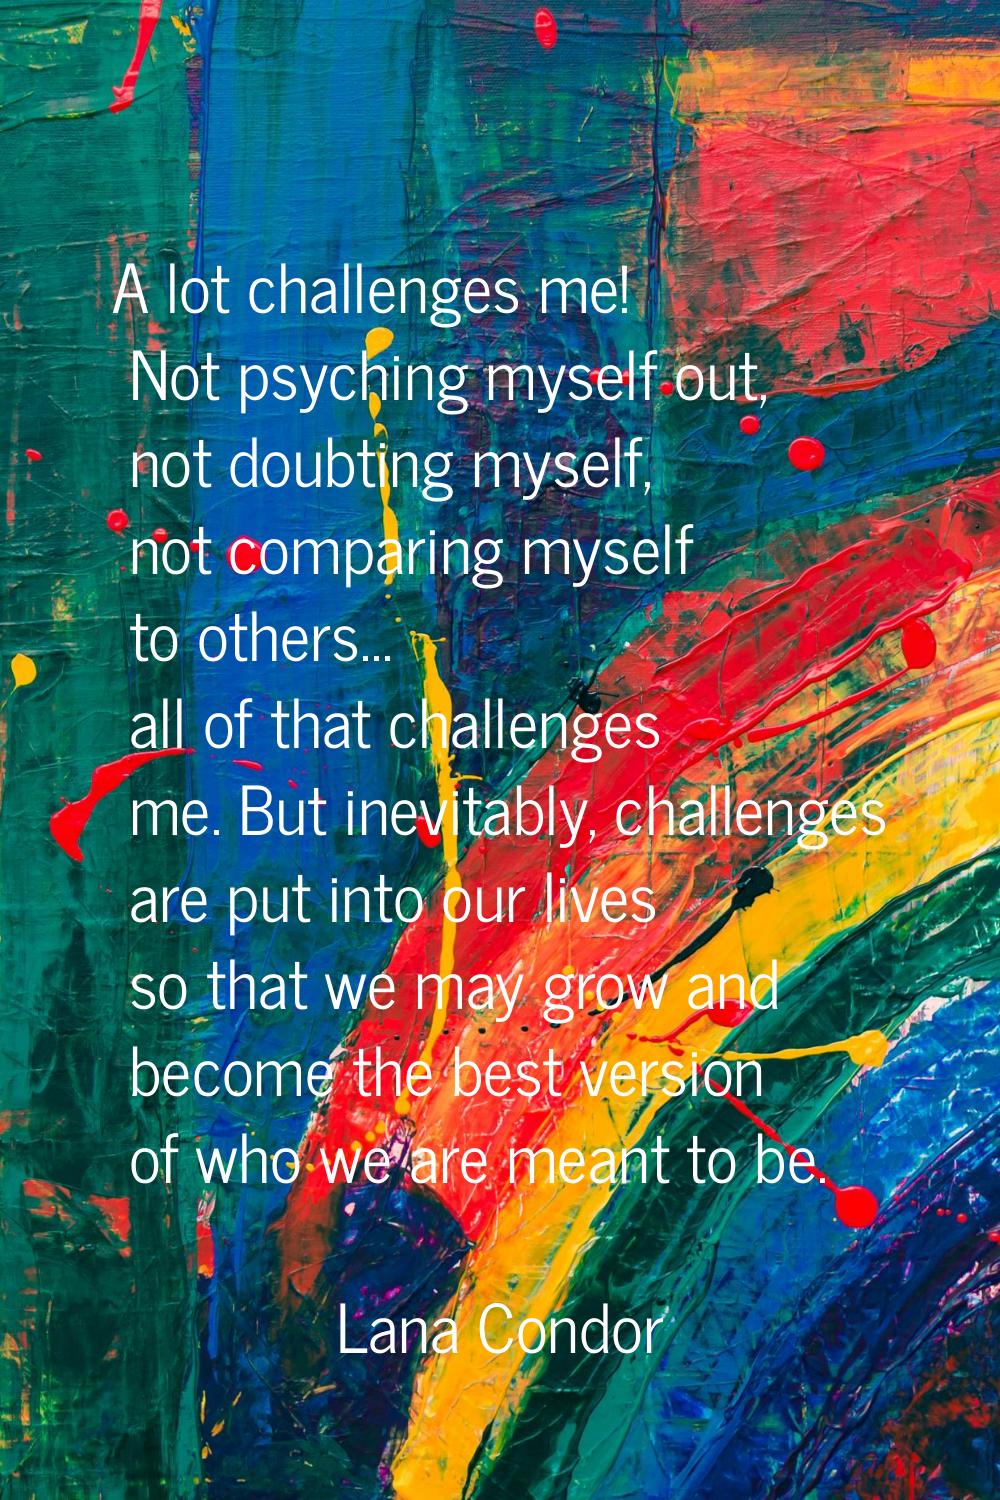 A lot challenges me! Not psyching myself out, not doubting myself, not comparing myself to others..